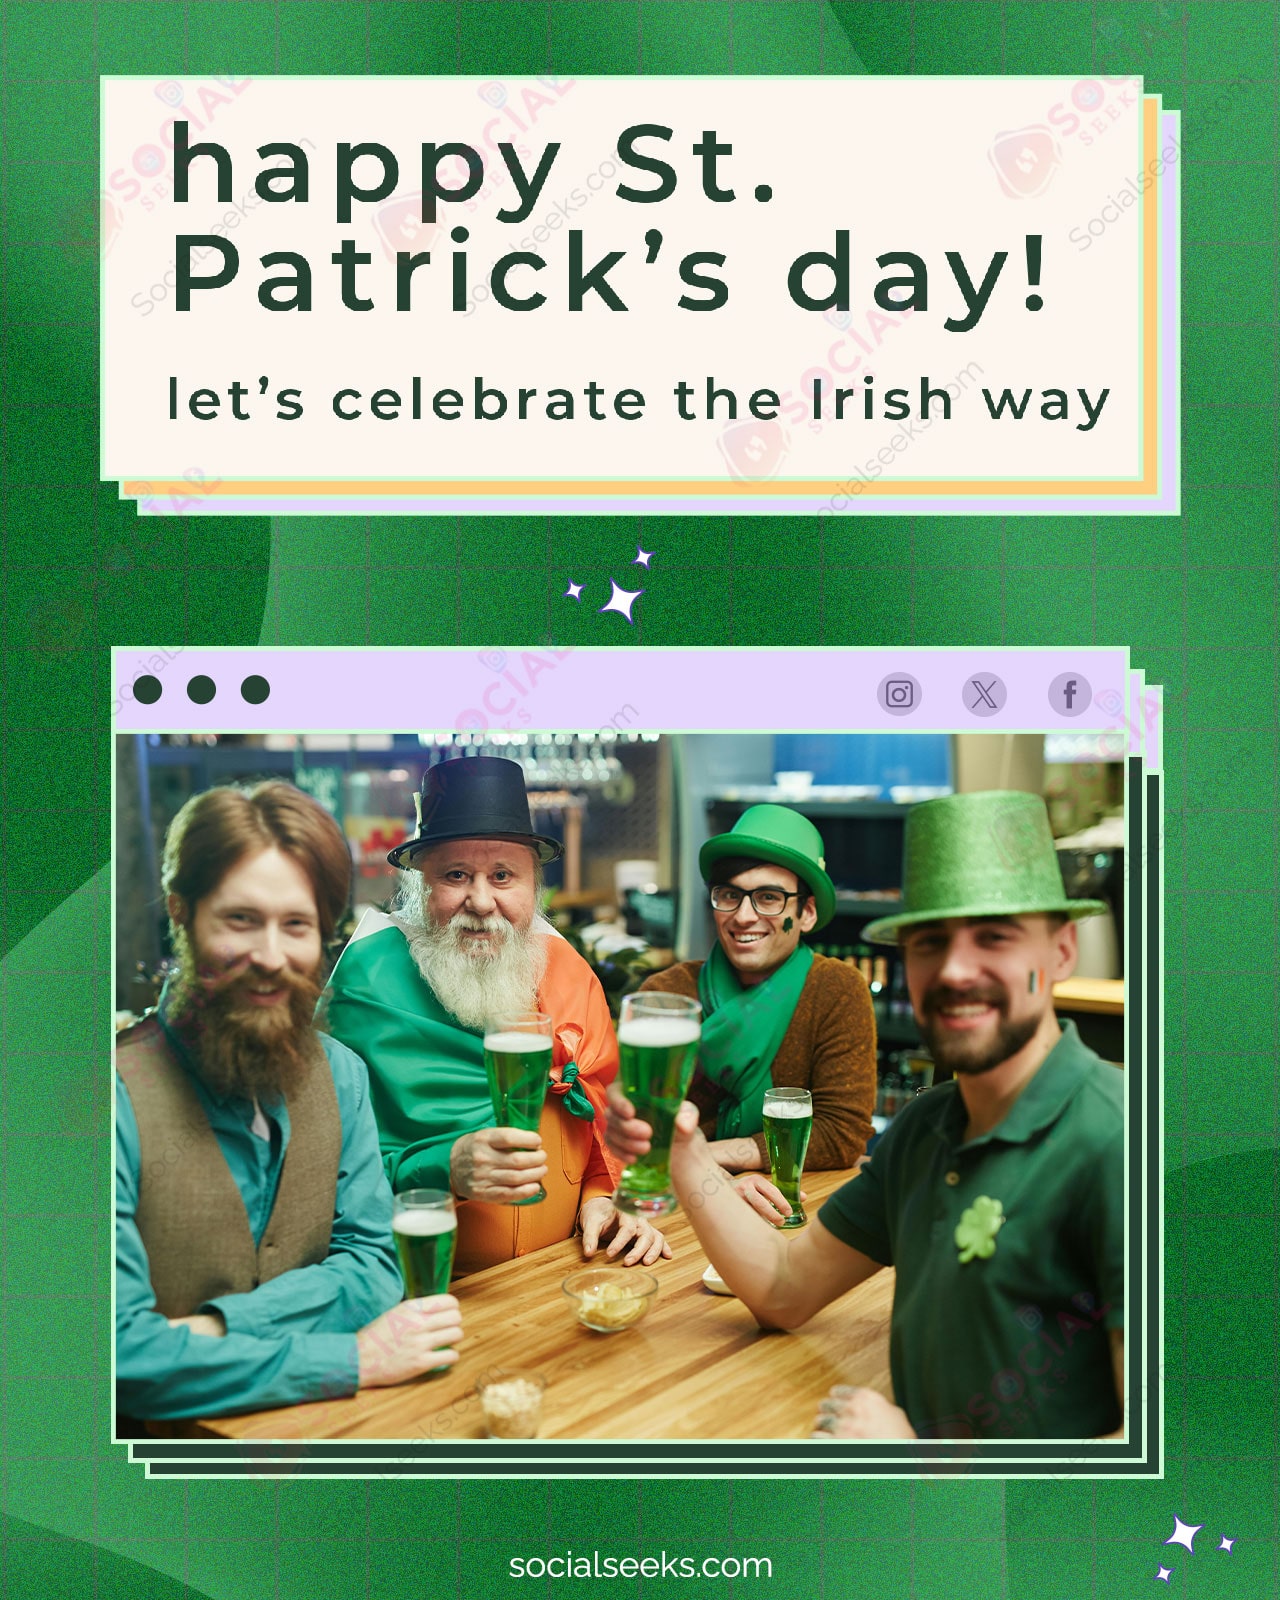 The Best St. Patrick's Day Photo Greeting Cards